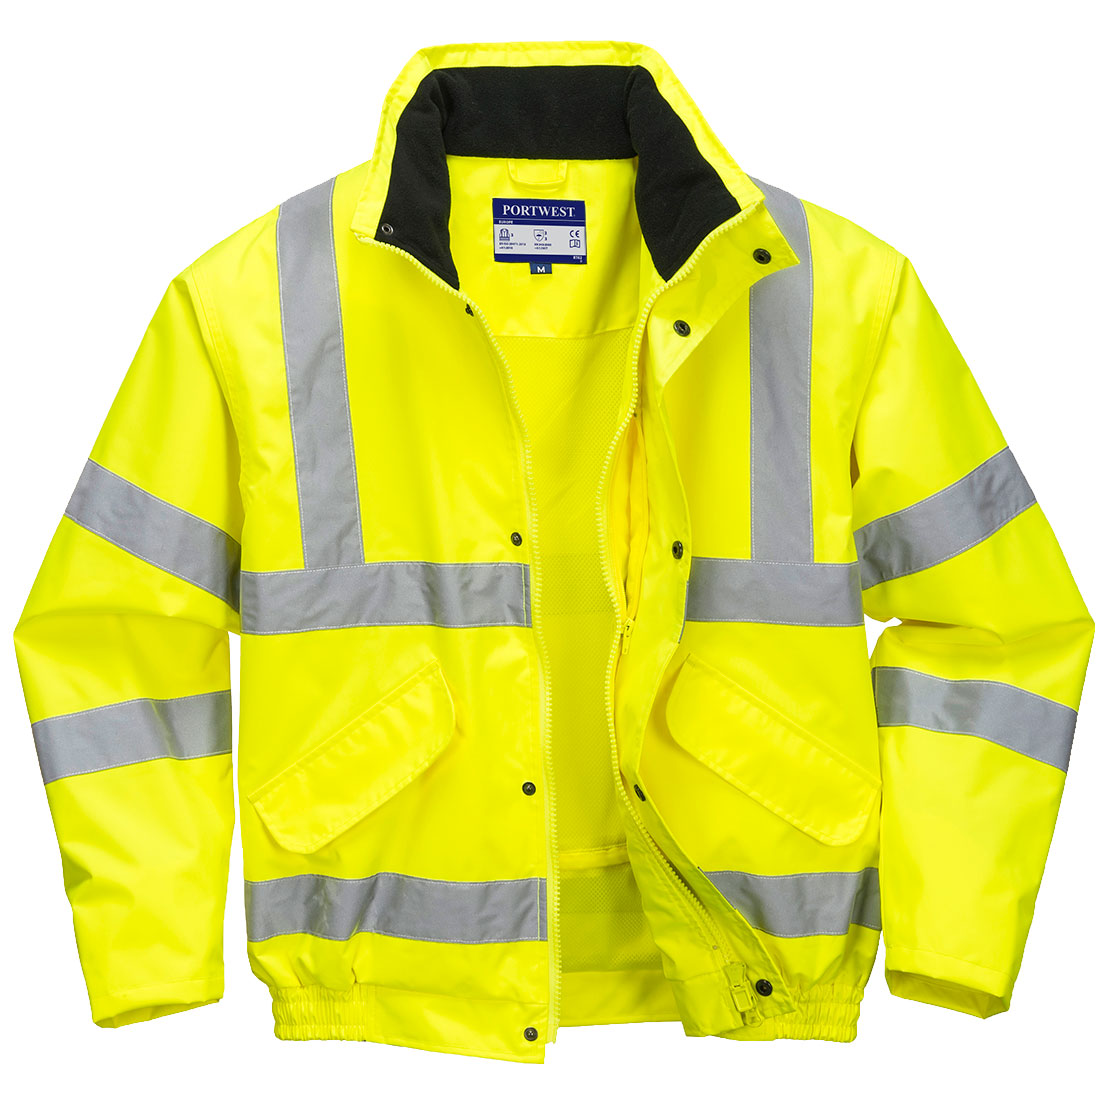 Portwest RT62 Hi-Vis Breathable Mesh Lined Jacket - Yellow